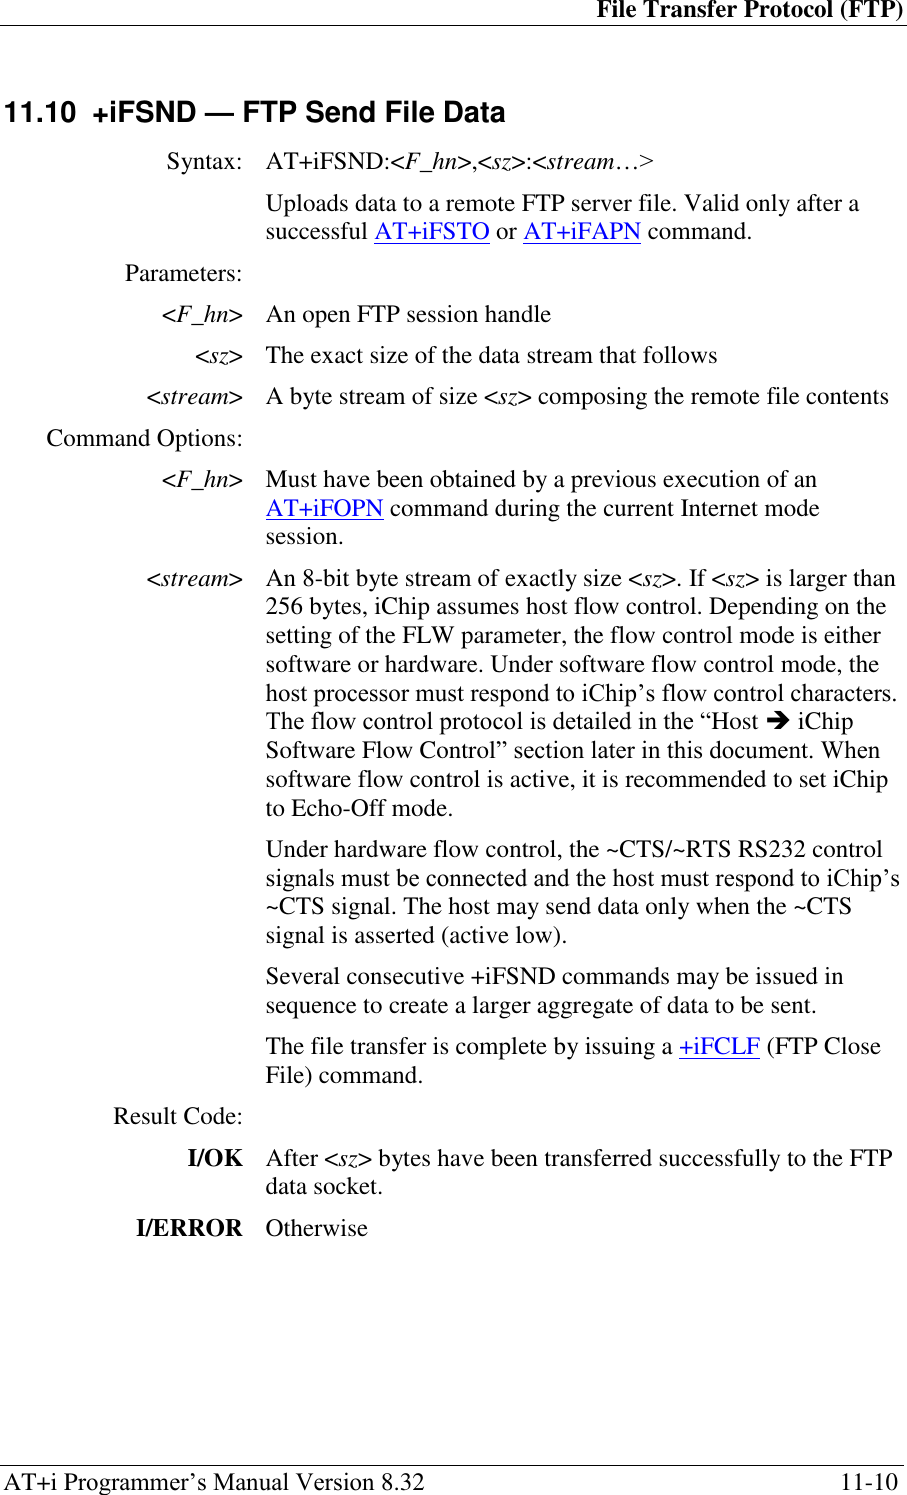 File Transfer Protocol (FTP) AT+i Programmer‘s Manual Version 8.32  11-10 11.10  +iFSND — FTP Send File Data  Syntax: AT+iFSND:&lt;F_hn&gt;,&lt;sz&gt;:&lt;stream…&gt;  Uploads data to a remote FTP server file. Valid only after a successful AT+iFSTO or AT+iFAPN command. Parameters:  &lt;F_hn&gt; An open FTP session handle &lt;sz&gt; The exact size of the data stream that follows &lt;stream&gt; A byte stream of size &lt;sz&gt; composing the remote file contents Command Options:  &lt;F_hn&gt; Must have been obtained by a previous execution of an AT+iFOPN command during the current Internet mode session. &lt;stream&gt; An 8-bit byte stream of exactly size &lt;sz&gt;. If &lt;sz&gt; is larger than 256 bytes, iChip assumes host flow control. Depending on the setting of the FLW parameter, the flow control mode is either software or hardware. Under software flow control mode, the host processor must respond to iChip‘s flow control characters. The flow control protocol is detailed in the ―Host  iChip Software Flow Control‖ section later in this document. When software flow control is active, it is recommended to set iChip to Echo-Off mode. Under hardware flow control, the ~CTS/~RTS RS232 control signals must be connected and the host must respond to iChip‘s ~CTS signal. The host may send data only when the ~CTS signal is asserted (active low). Several consecutive +iFSND commands may be issued in sequence to create a larger aggregate of data to be sent. The file transfer is complete by issuing a +iFCLF (FTP Close File) command. Result Code:  I/OK After &lt;sz&gt; bytes have been transferred successfully to the FTP data socket. I/ERROR Otherwise  